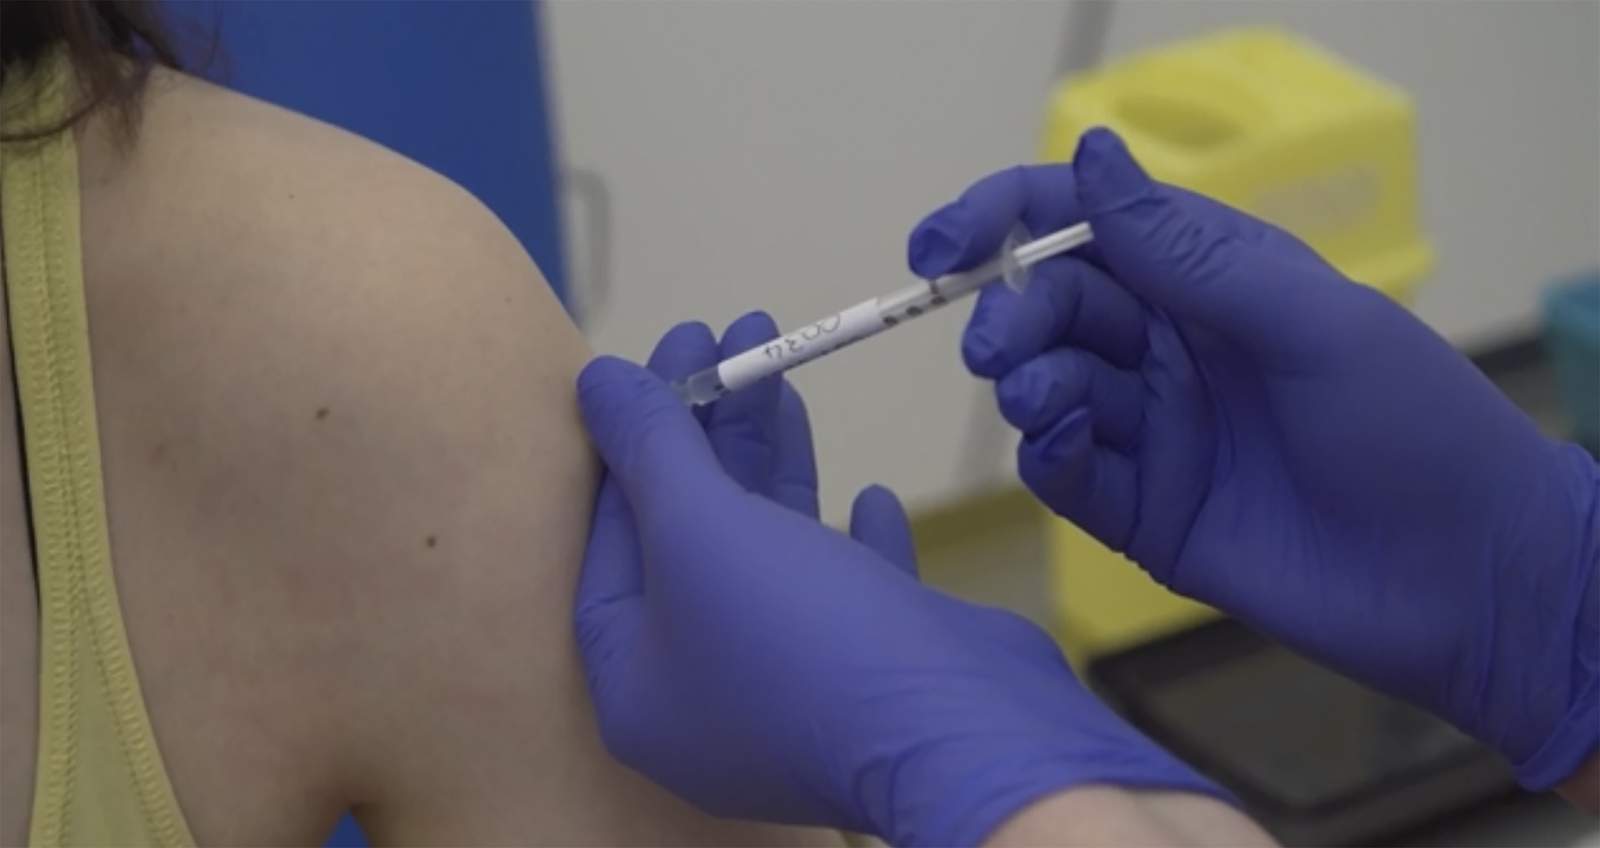 Oxford scientists expect COVID-19 vaccine data by Christmas